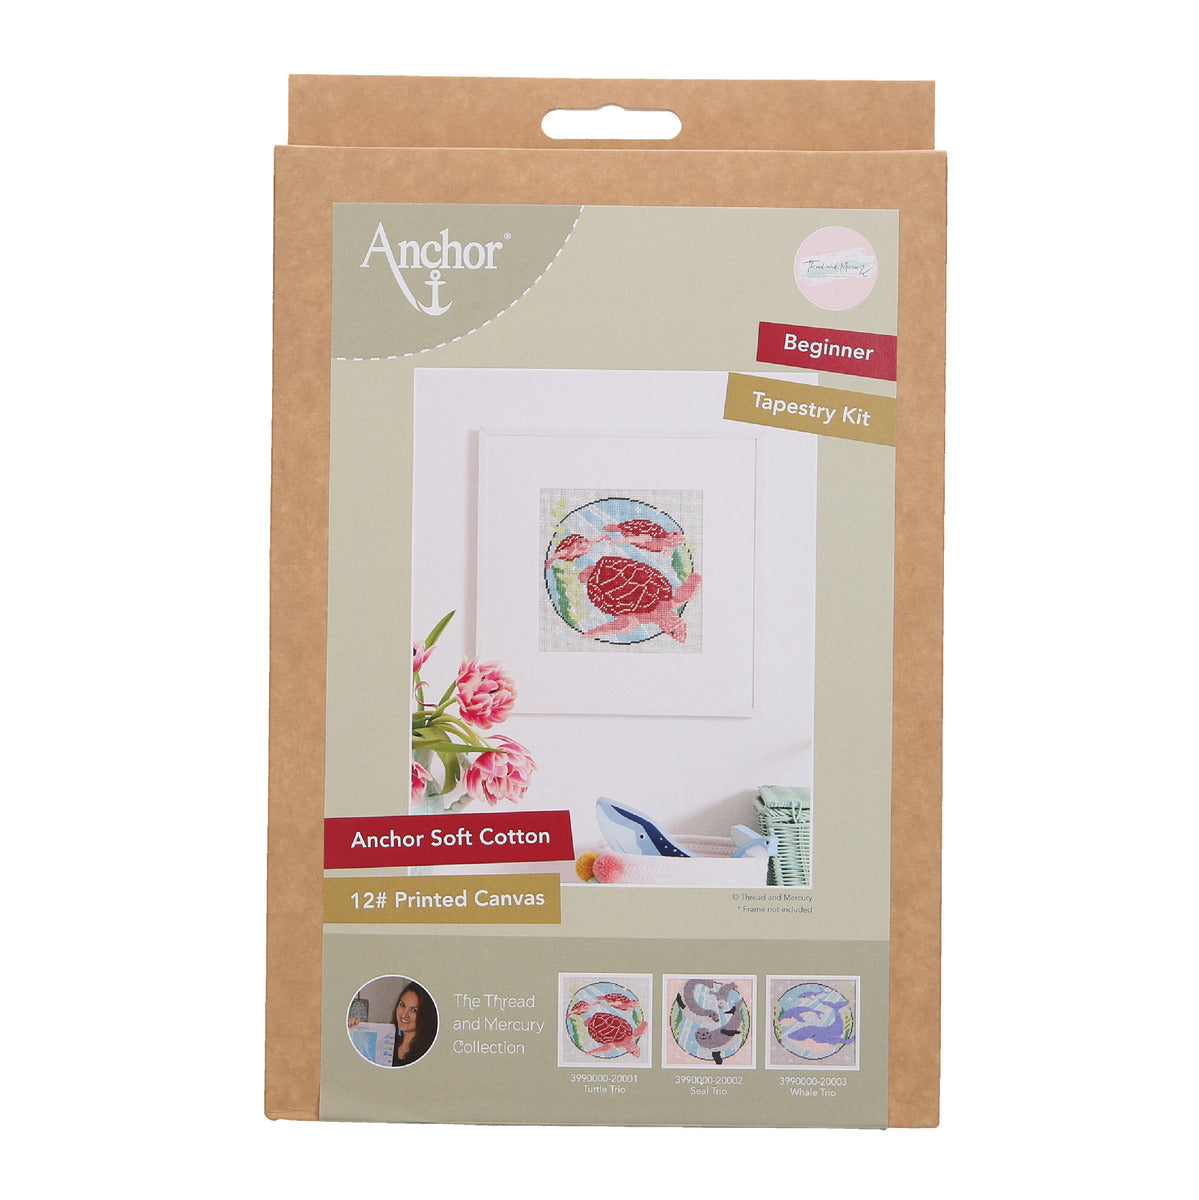 Anchor tapestry kit presented in a box